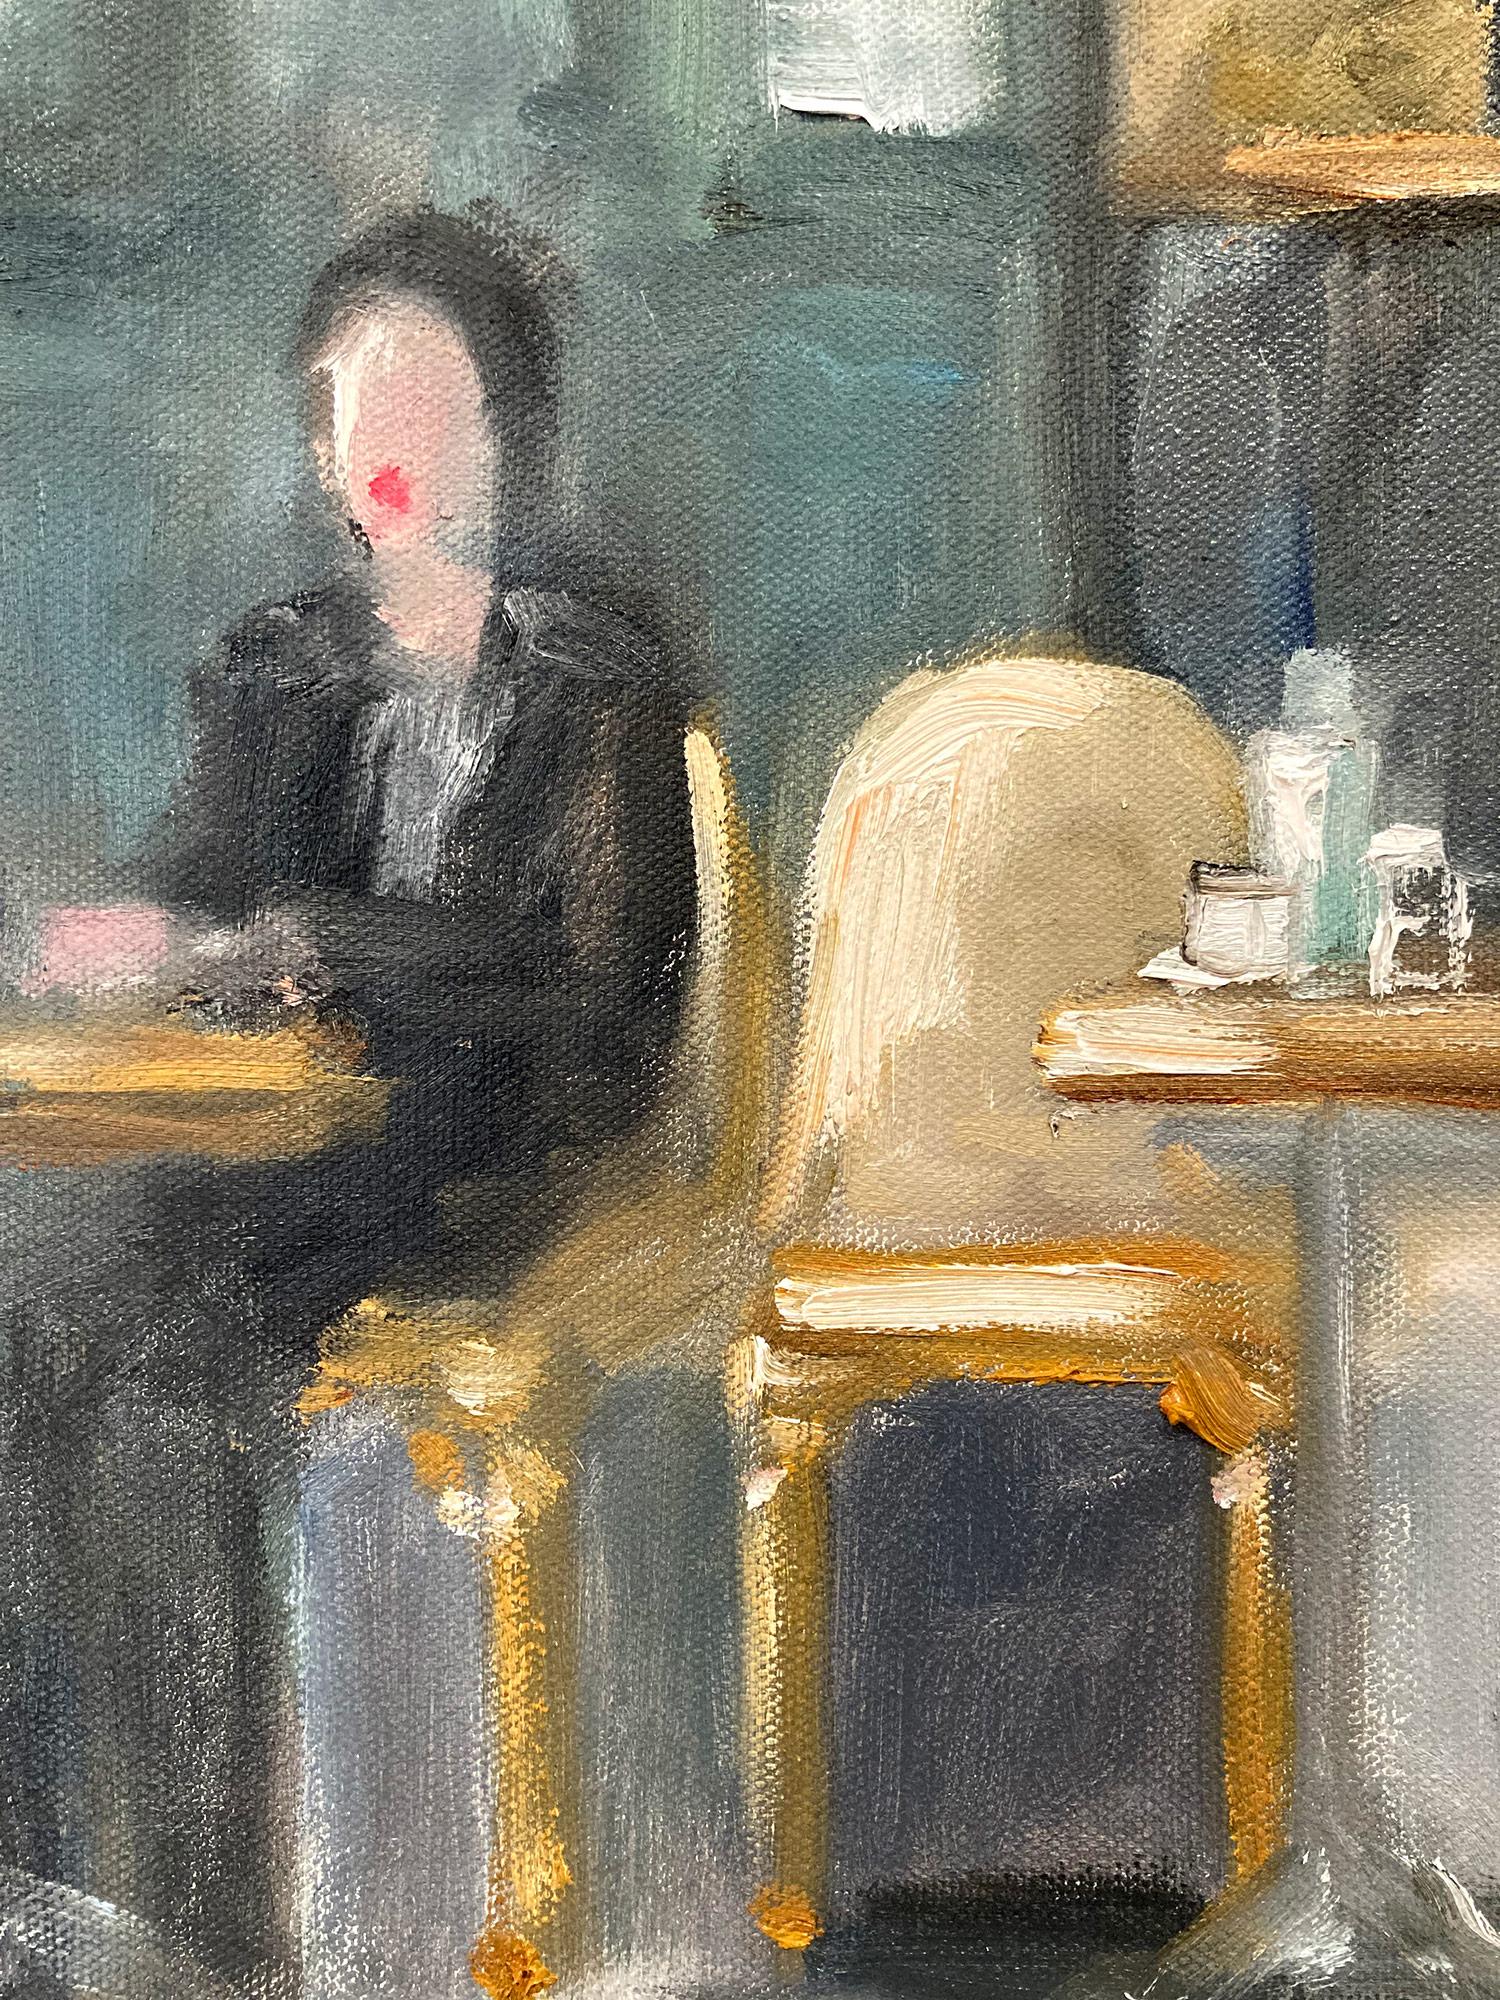 This painting depicts Lily Collins and Ashley Park at a Parisian Cafe, an impressionistic scene reinvented from Emily in Paris. 

This painting measures 16 x 23 inches

Inspired by whimsey and purity of the feminine form, Cindy Shaoul is known for